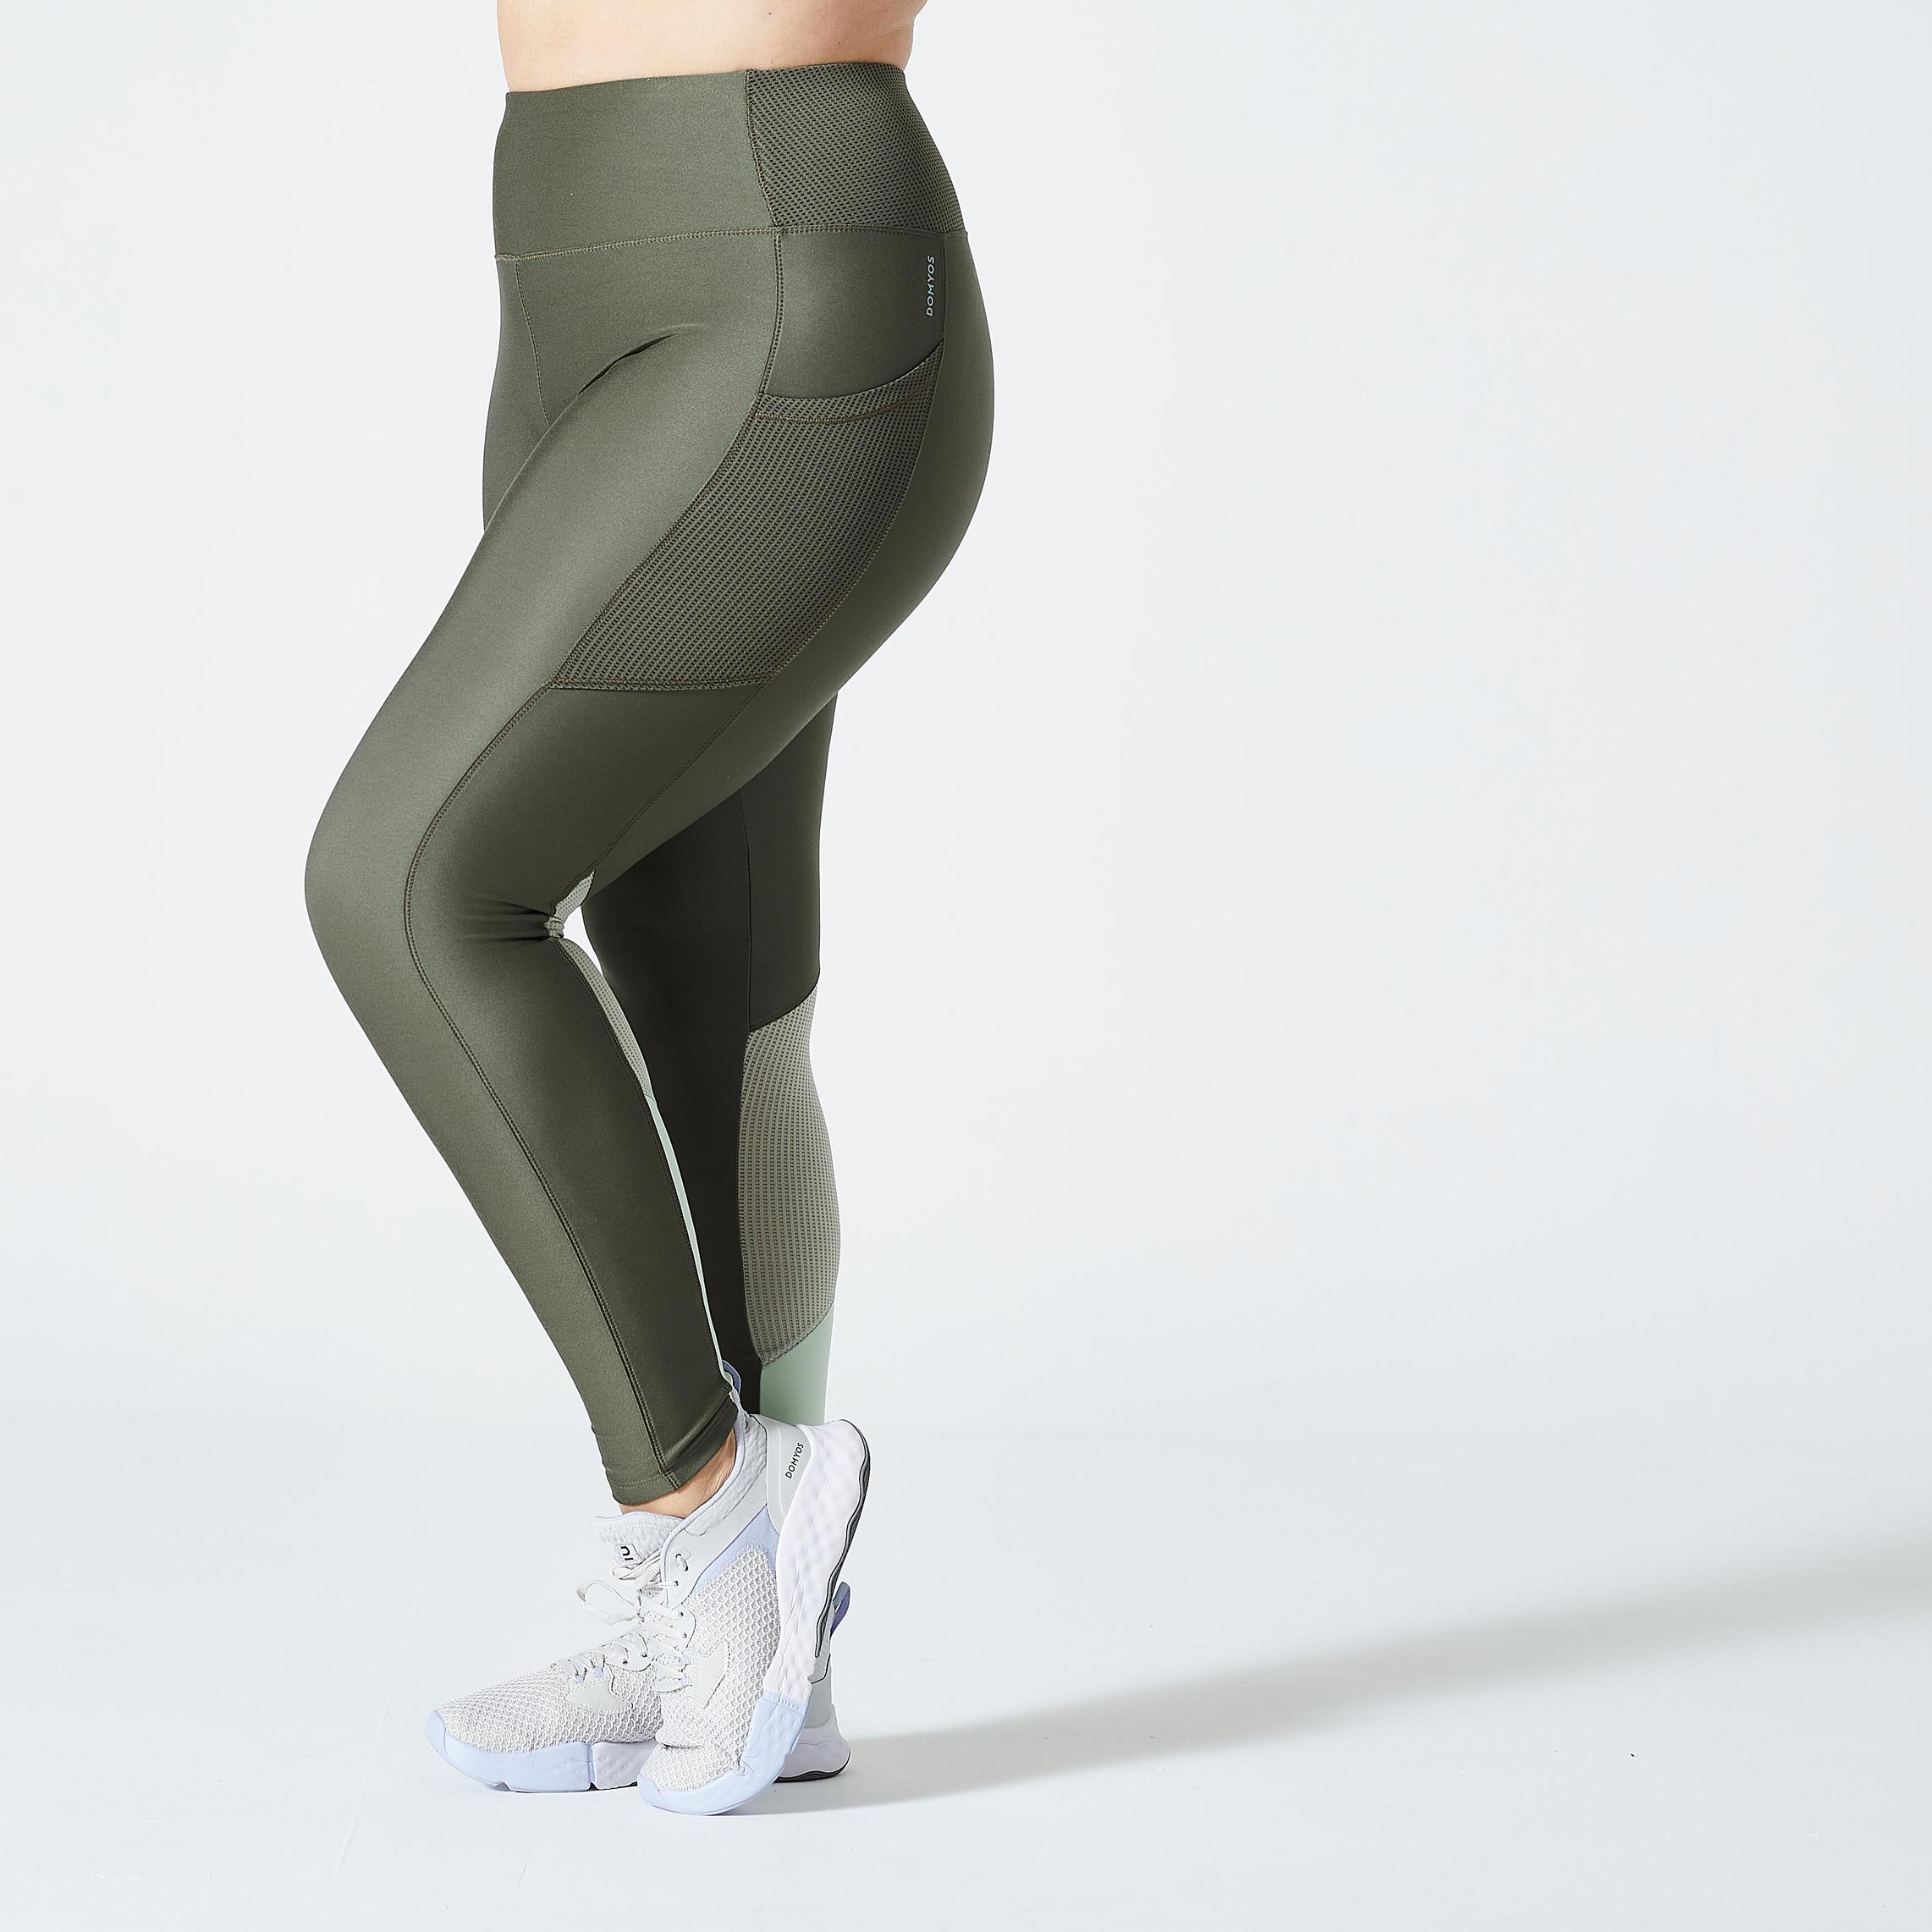 Women's Fitness Cardio Leggings with Phone Pocket - Khaki/Green offers at S$ 12.9 in Decathlon